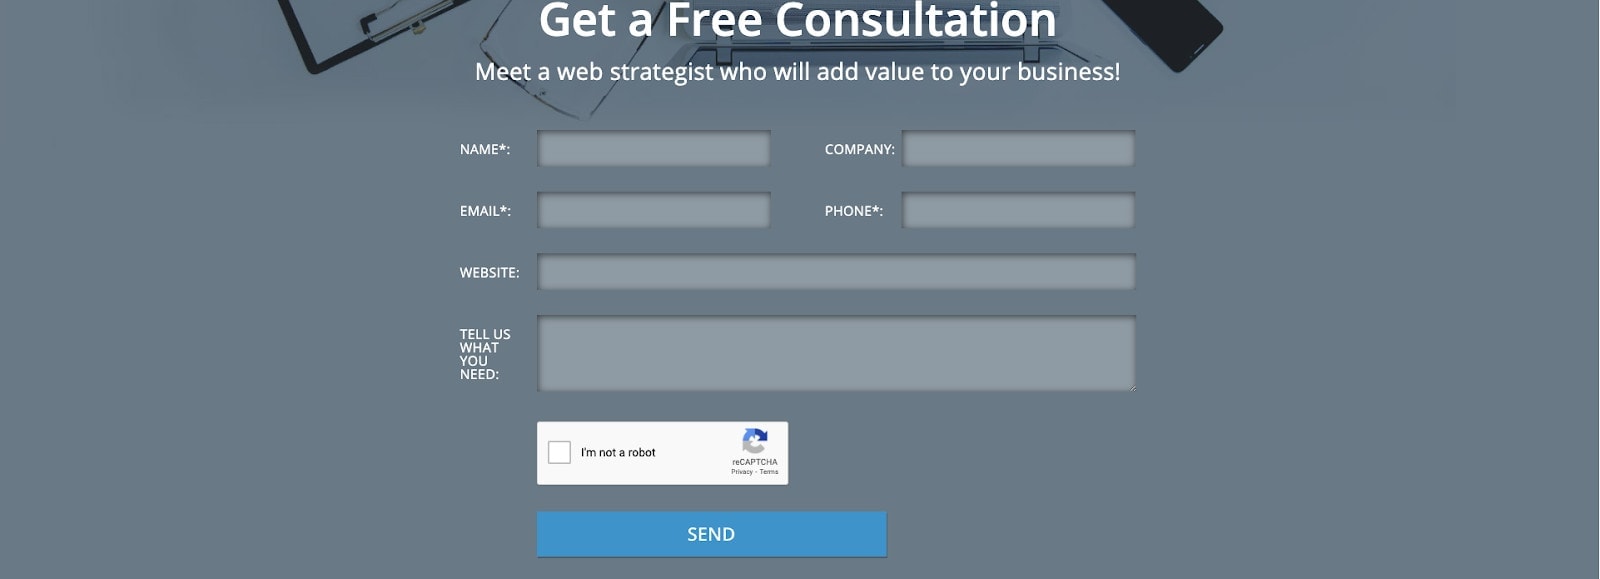 Screen shot of a contact form to book a free web design consultation. 